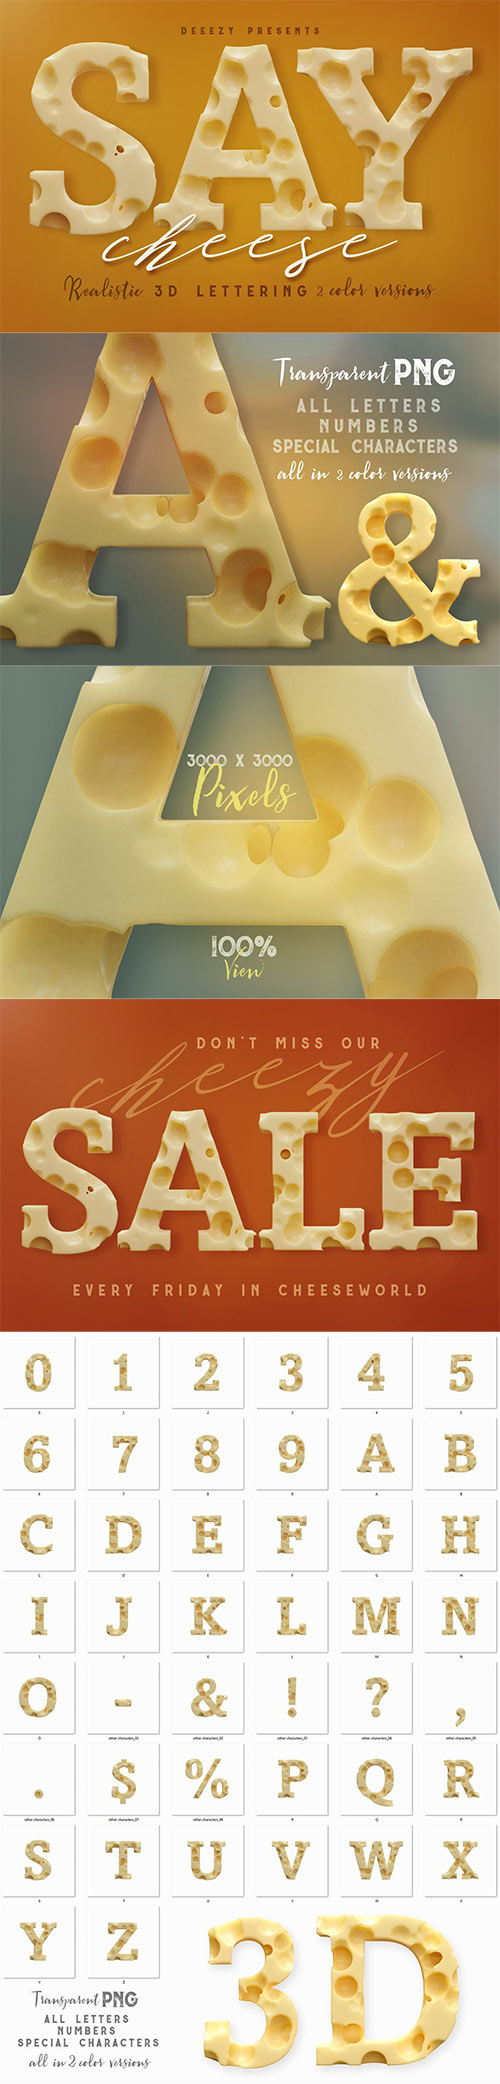 Cheese - 3D Lettering - 3300866